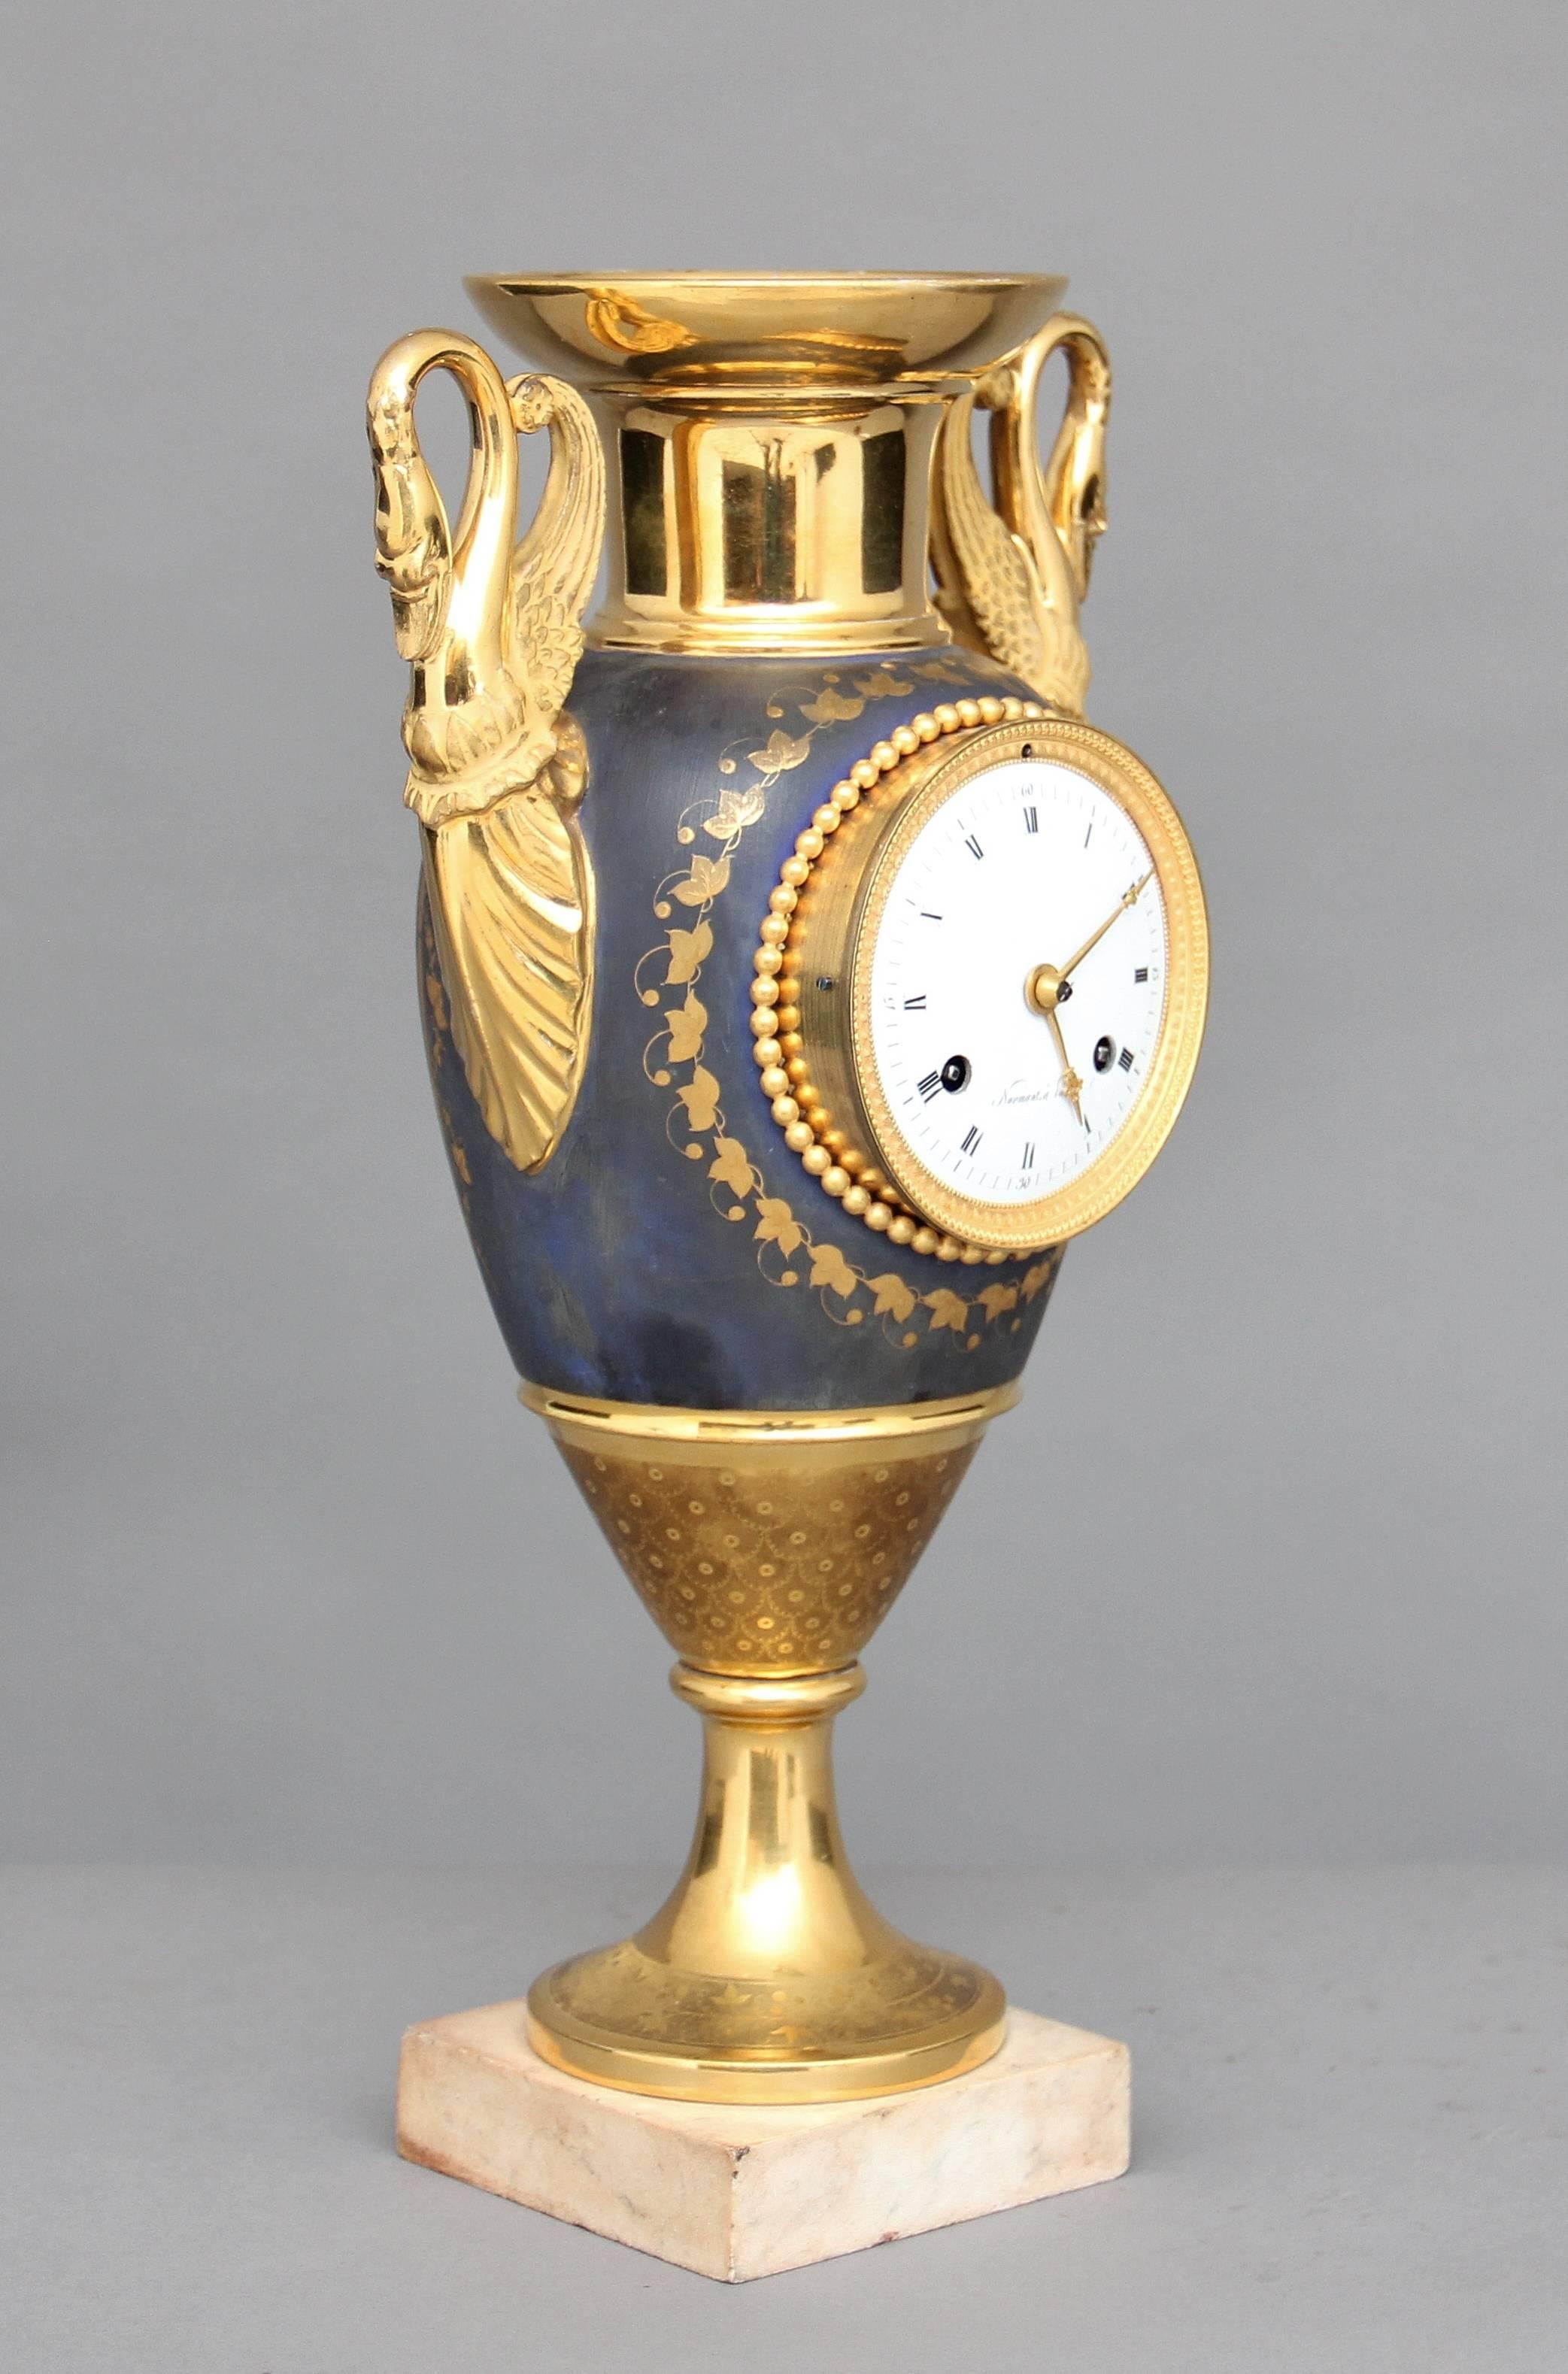 19th Century French porcelain mantle clock, the porcelain vase is blue with very fine gilt decoration and has an early 19th Century movement that strikes on the hour and half hour, this clock is in fabulous condition and keeps good time, it was more